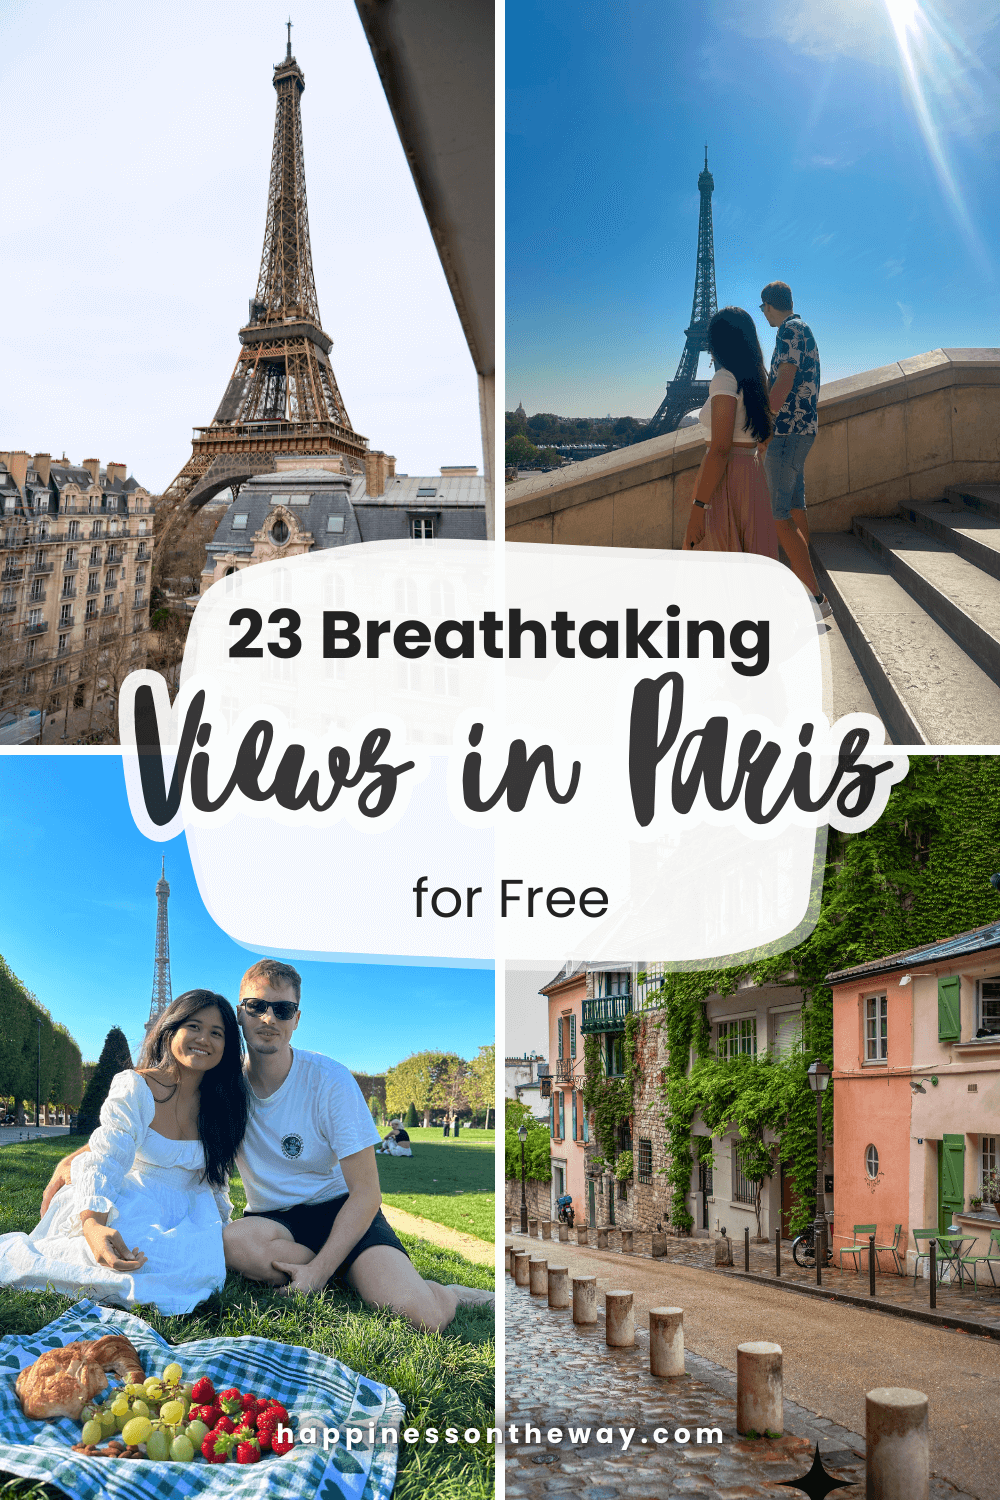 A Pinterest Collage of Parisian scenes including the Eiffel Tower viewed from a hotel, a couple at Trocadéro, a picnic on the Champ de Mars, and a charming street in Montmartre. Text overlay reads '23 Breathtaking Views in Paris for Free'.